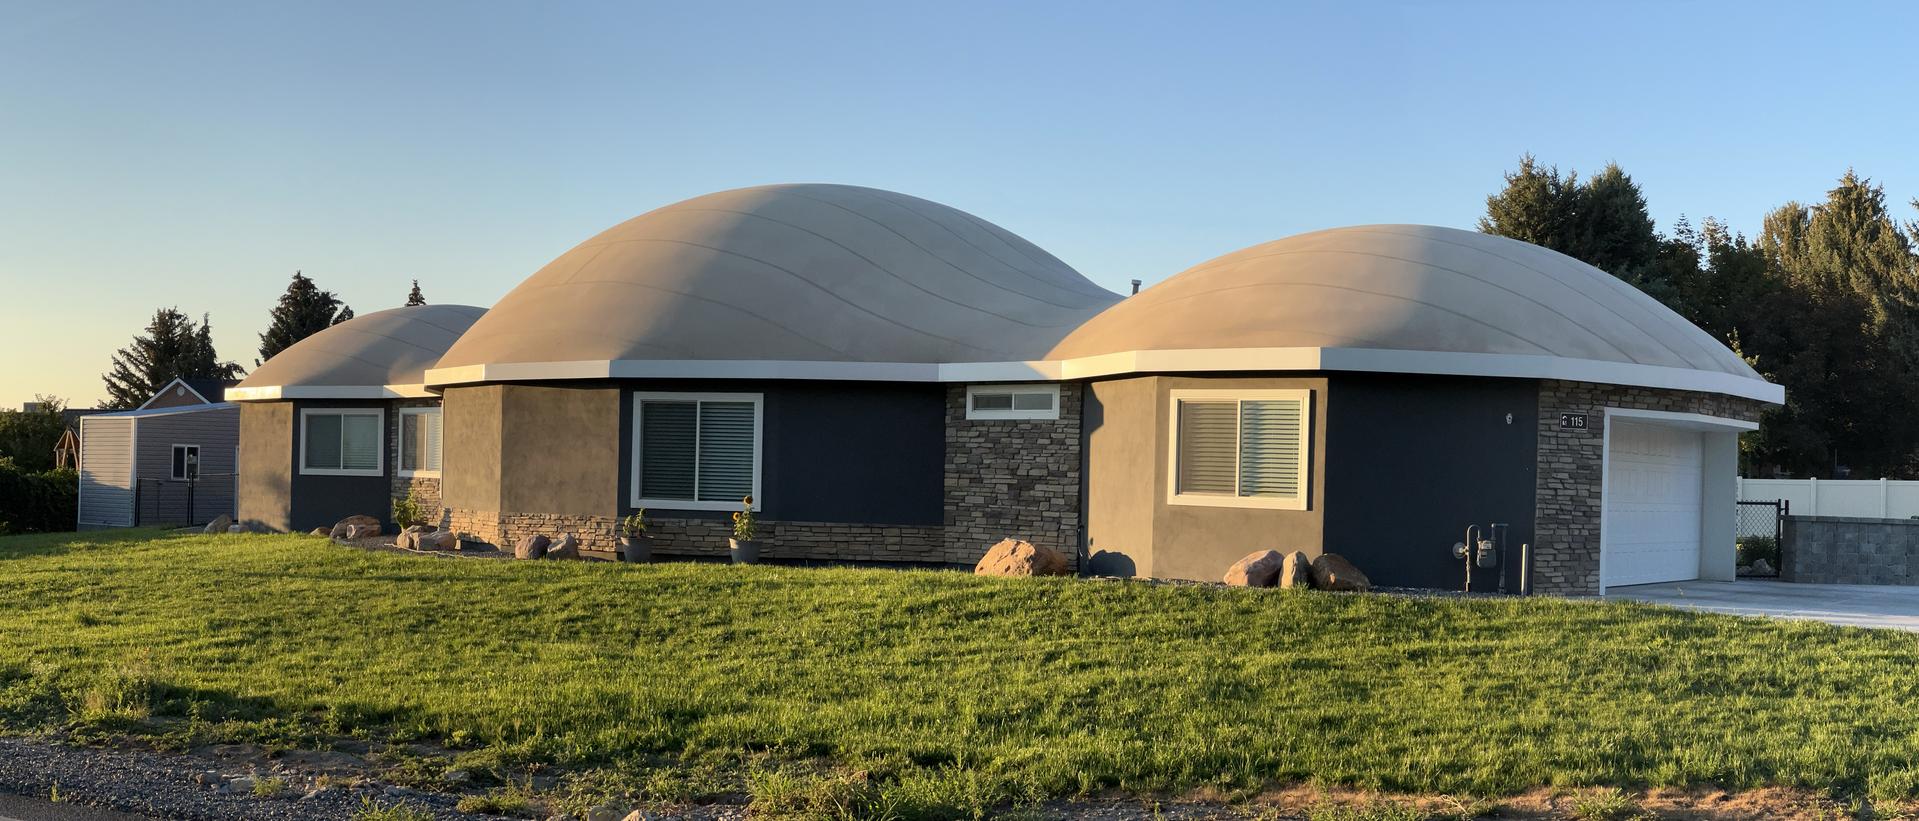 View of Arcadia Dome Home in Providence, Utah.